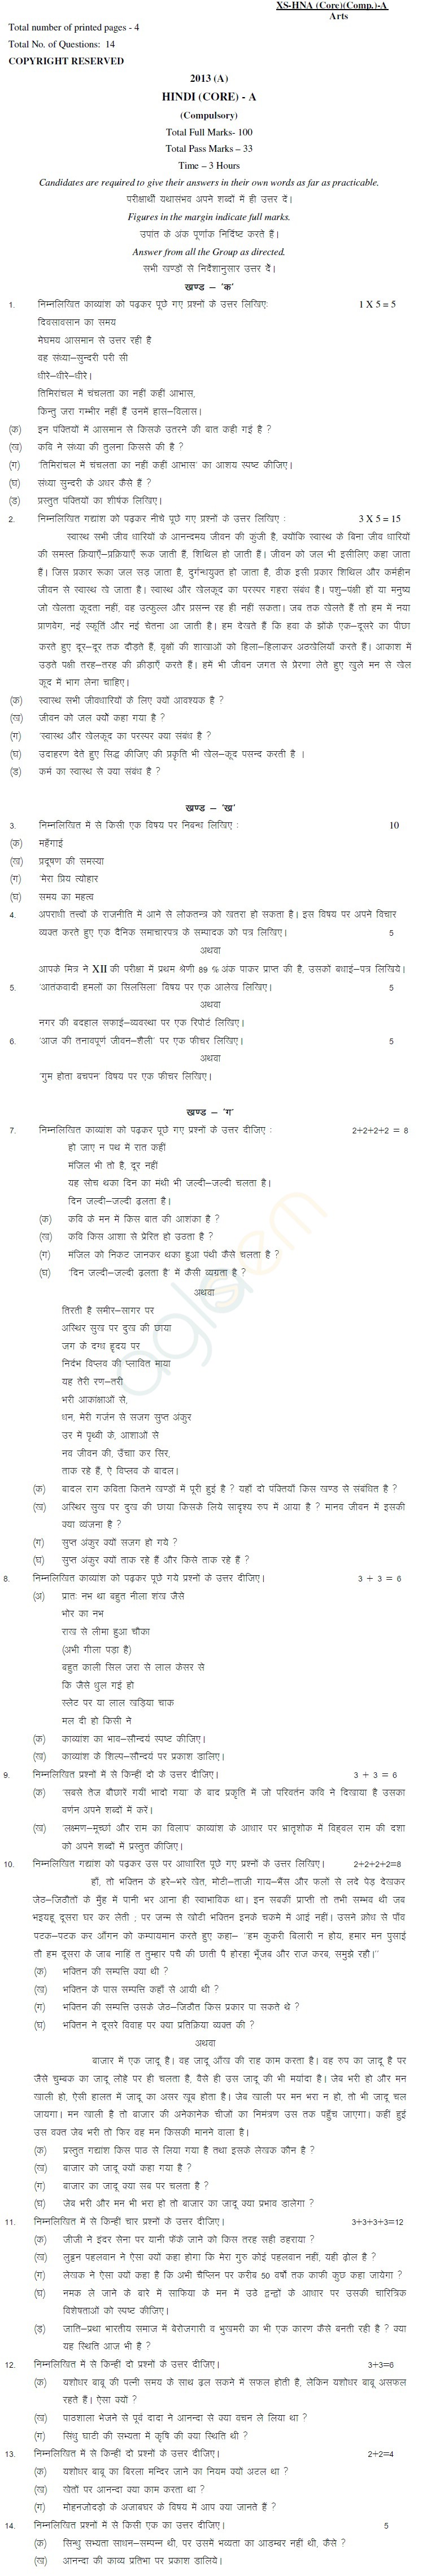 Jharkhand Board Class XII Sample Papers â HINDI CORE